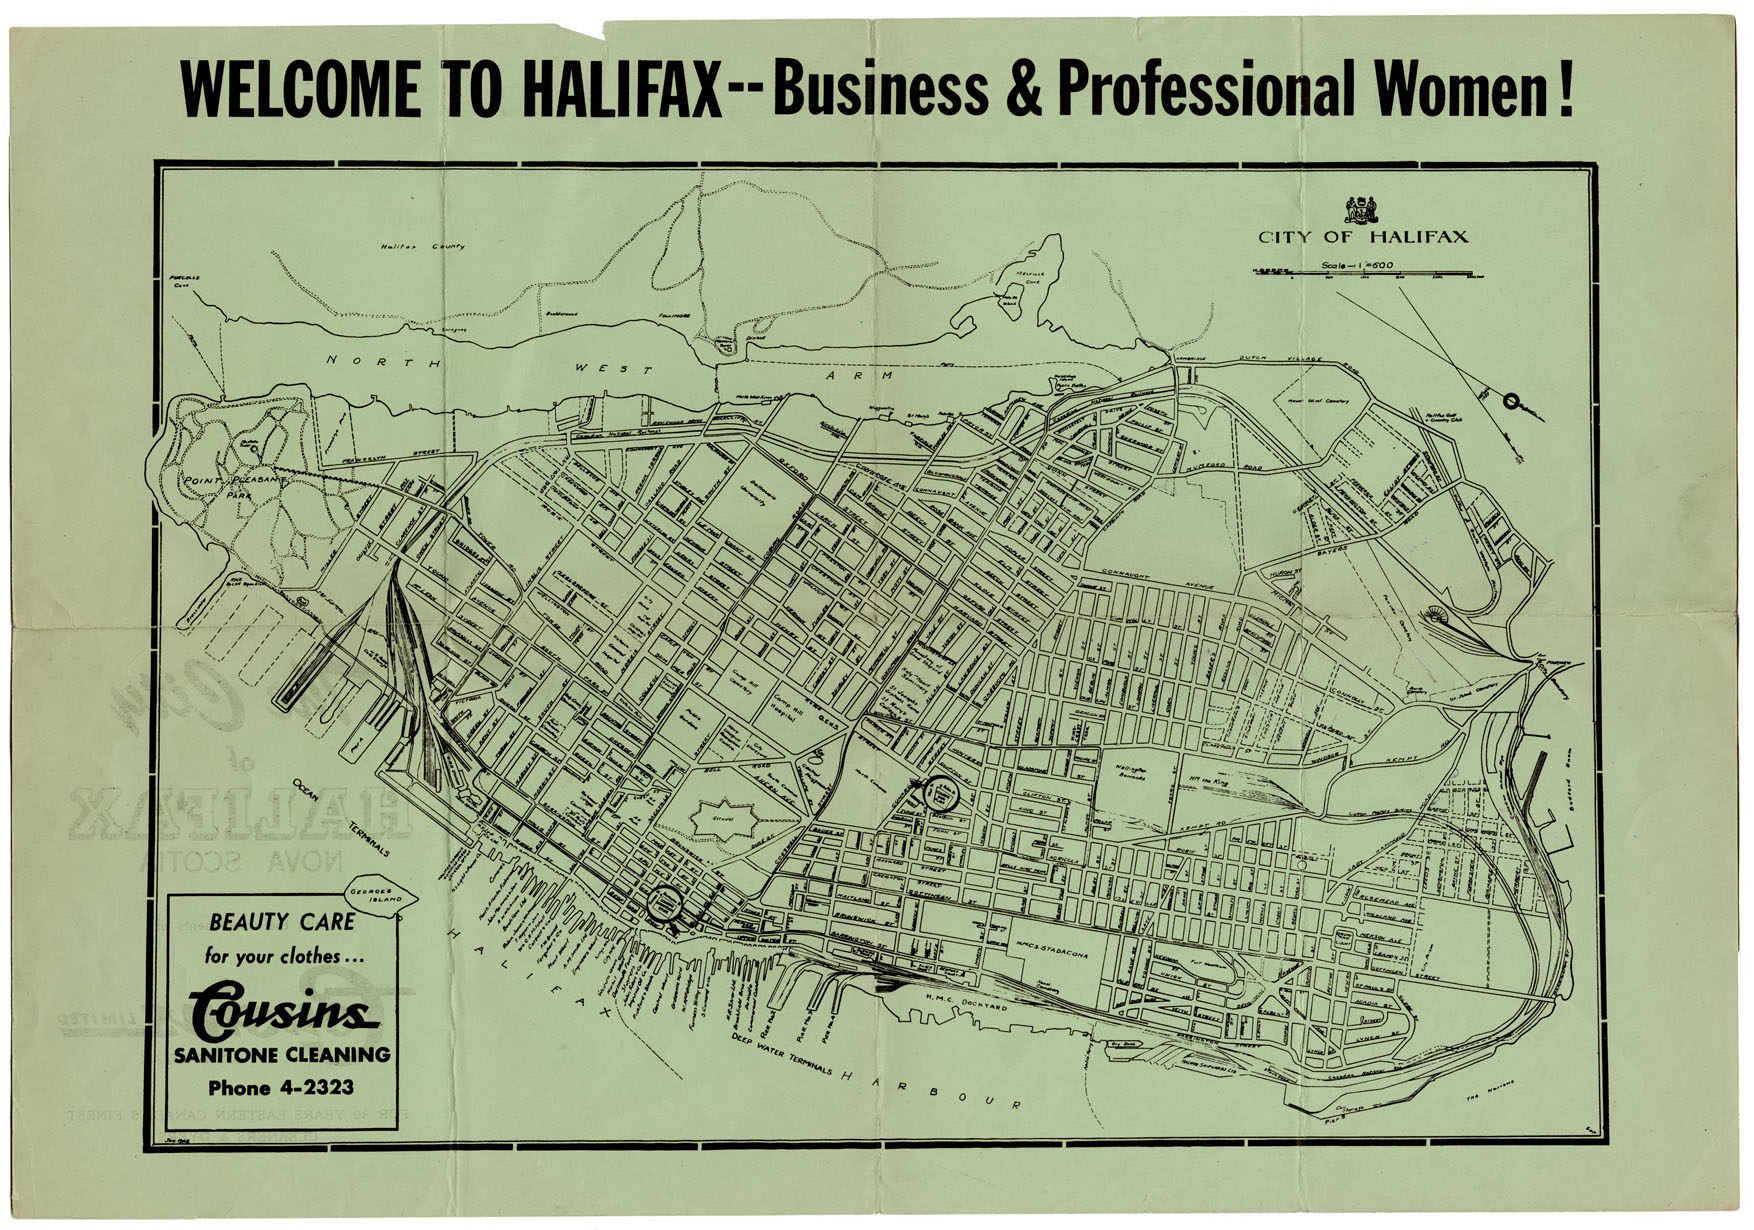 The City of Halifax, N.S. with the Compliments of Cousins